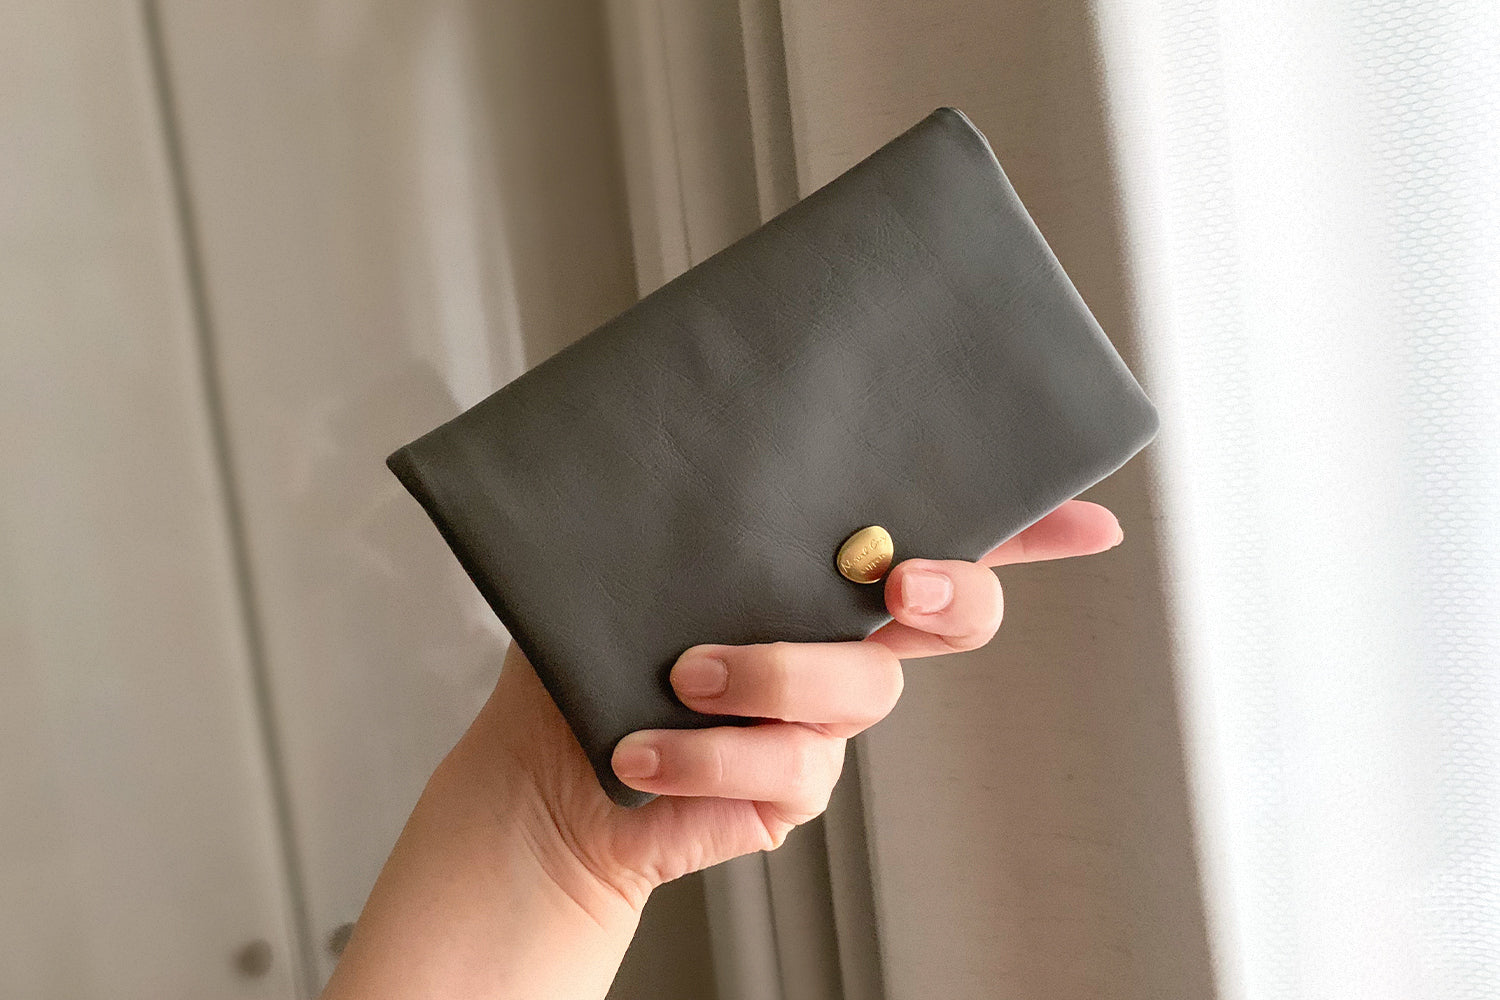 Neutral Gray Husky New color available Soft horse leather bi-fold wallet clutch that fits comfortably in your hand Made in Japan 